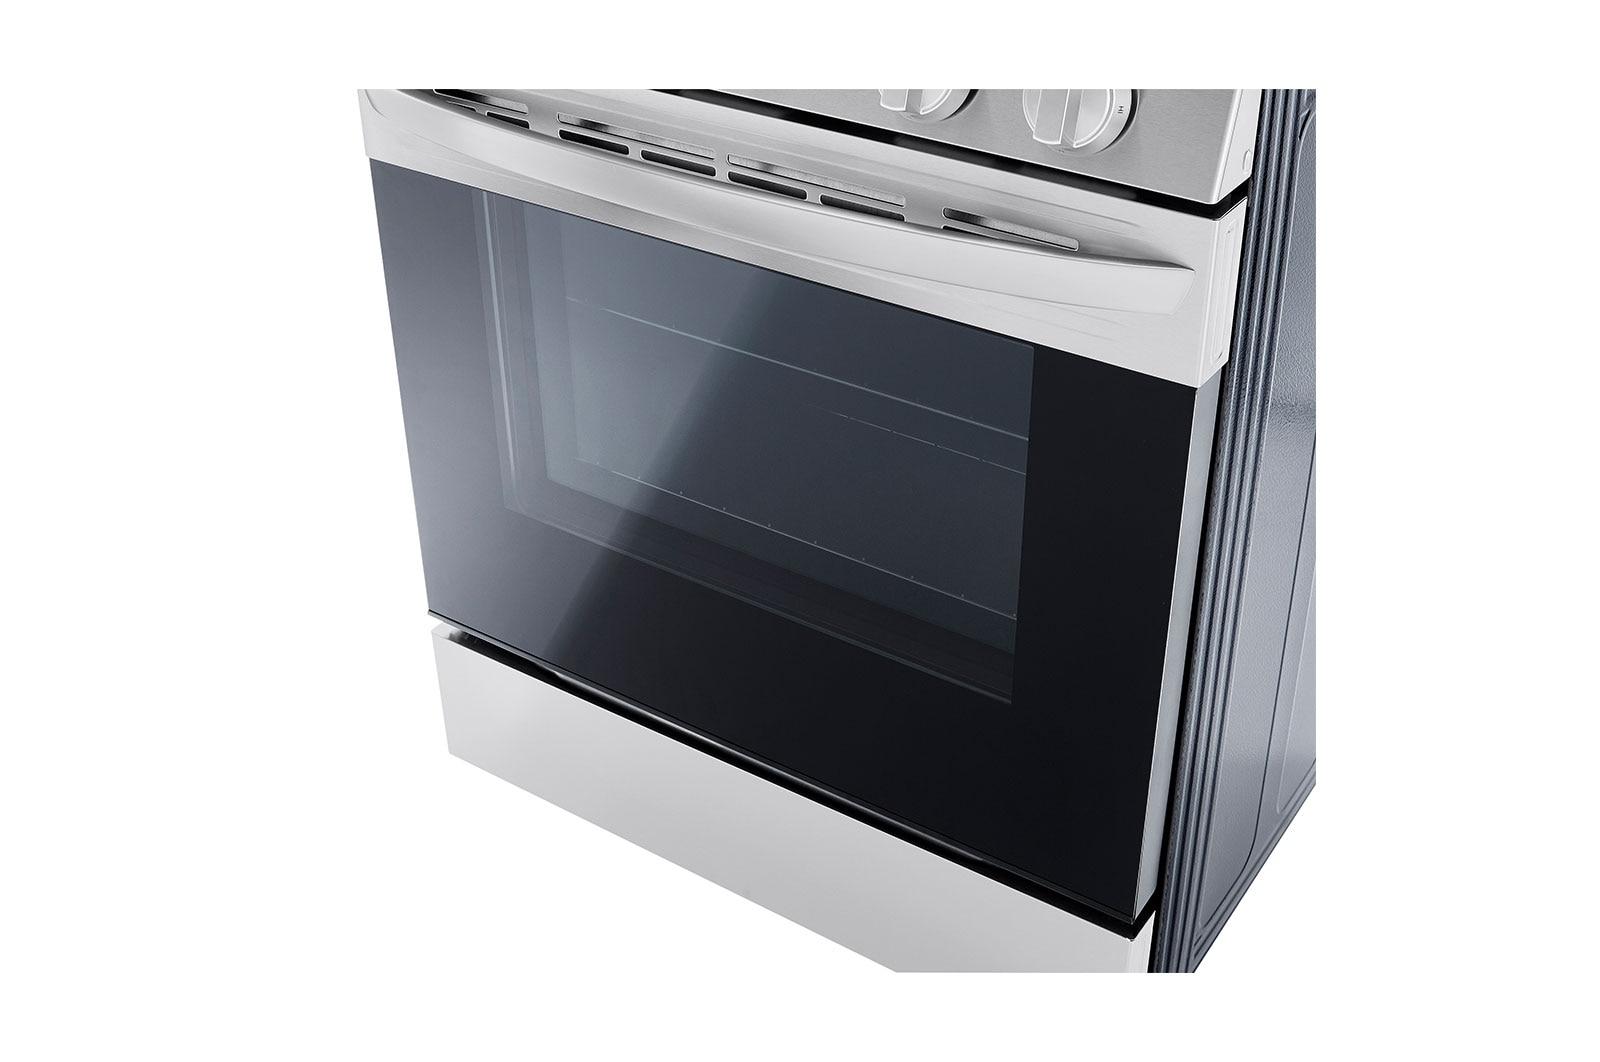 Lg 5.8 cu ft. Smart Wi-Fi Enabled Fan Convection Gas Range with Air Fry